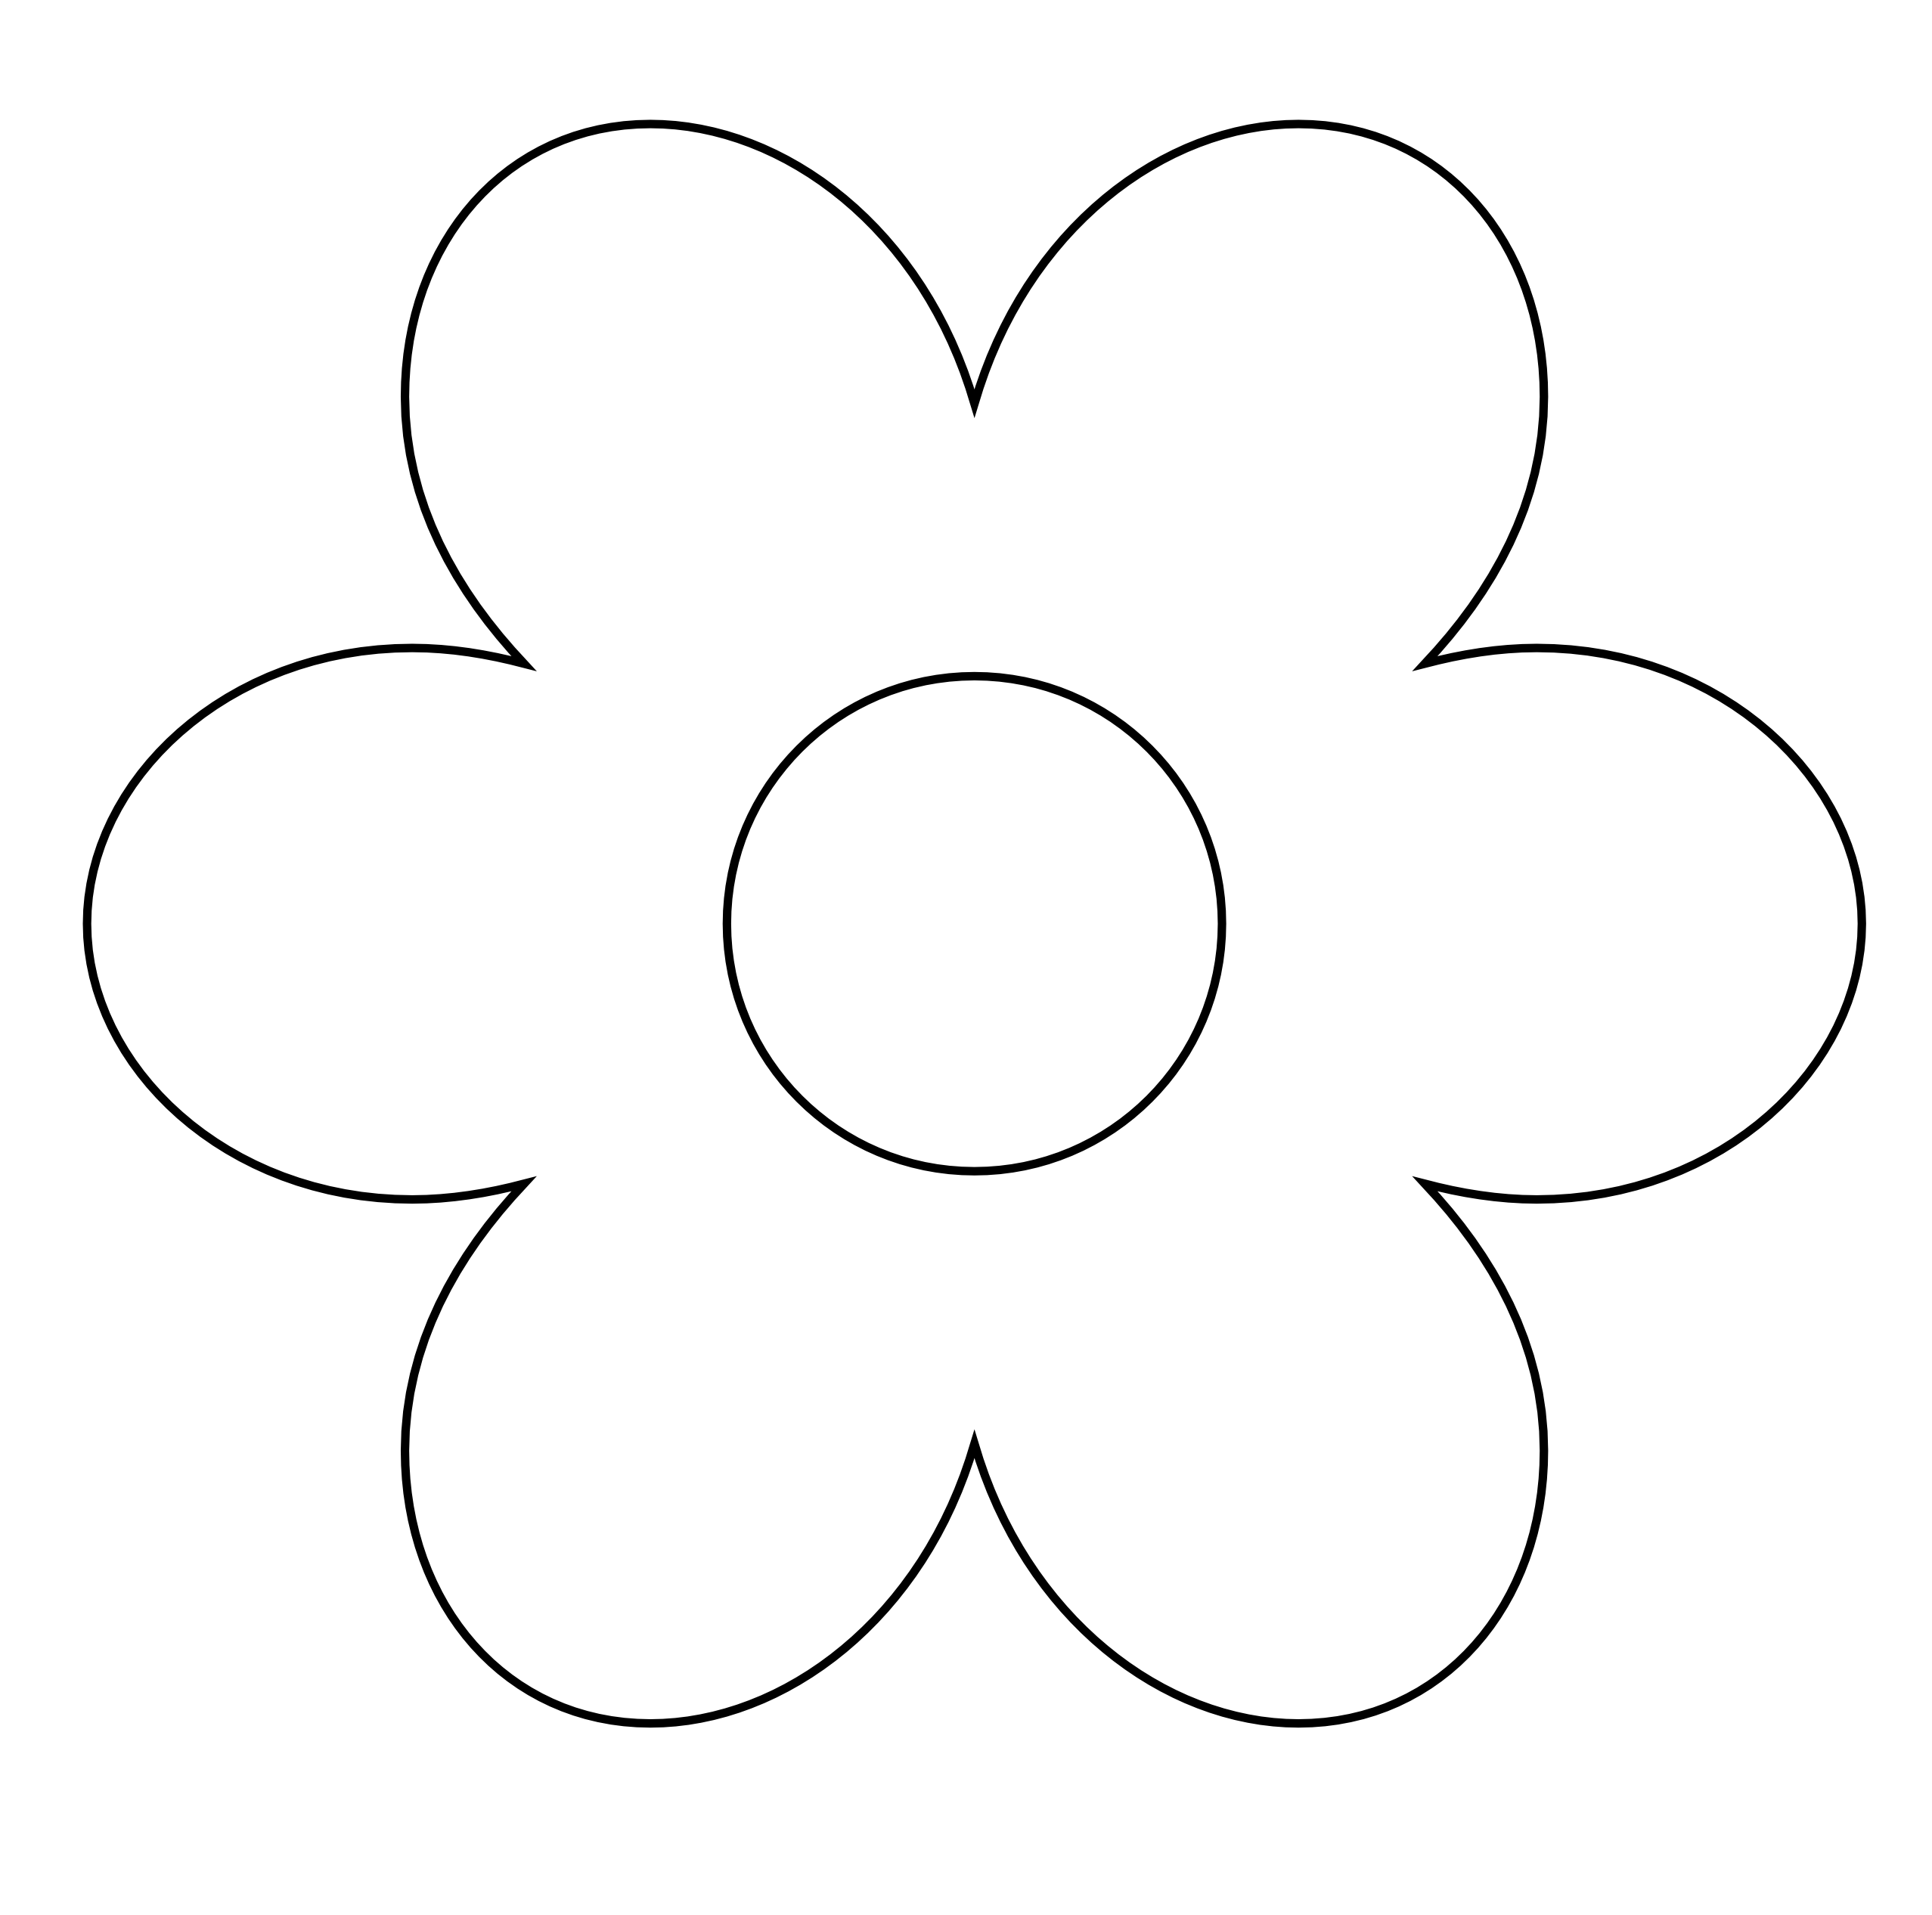 Free Flower Black And White, Download Free Flower Black And White png